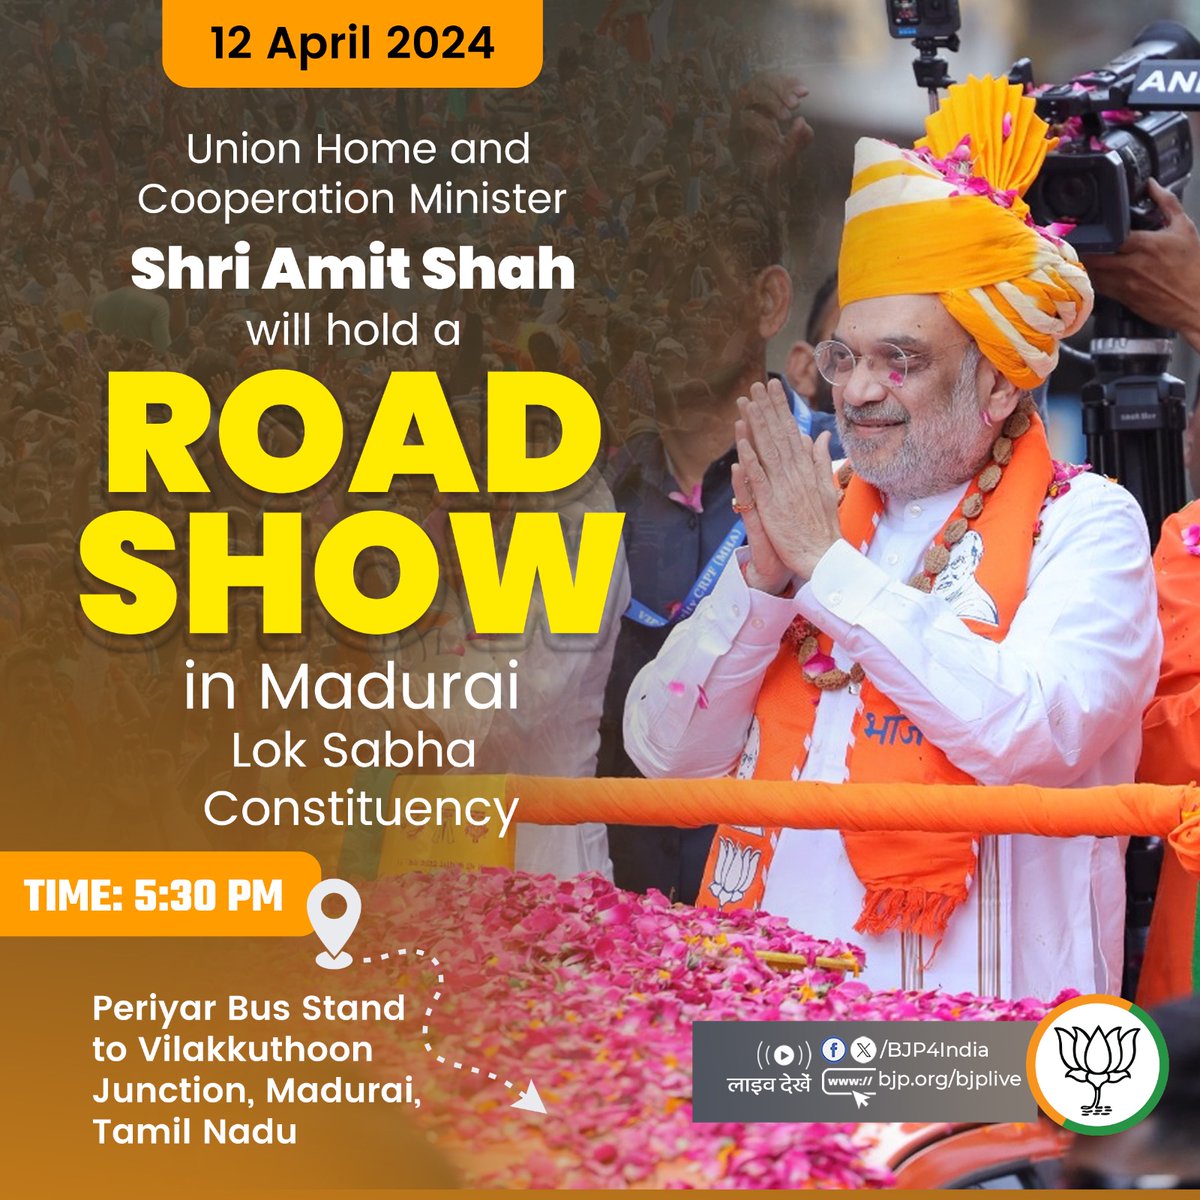 Union Home and Cooperation Minister Shri @AmitShah will hold a roadshow in Madurai, Tamil Nadu on 12 April 2024. Watch live: 📺twitter.com/BJP4India 📺facebook.com/BJP4India 📺youtube.com/BJP4India 📺bjp.org/bjplive